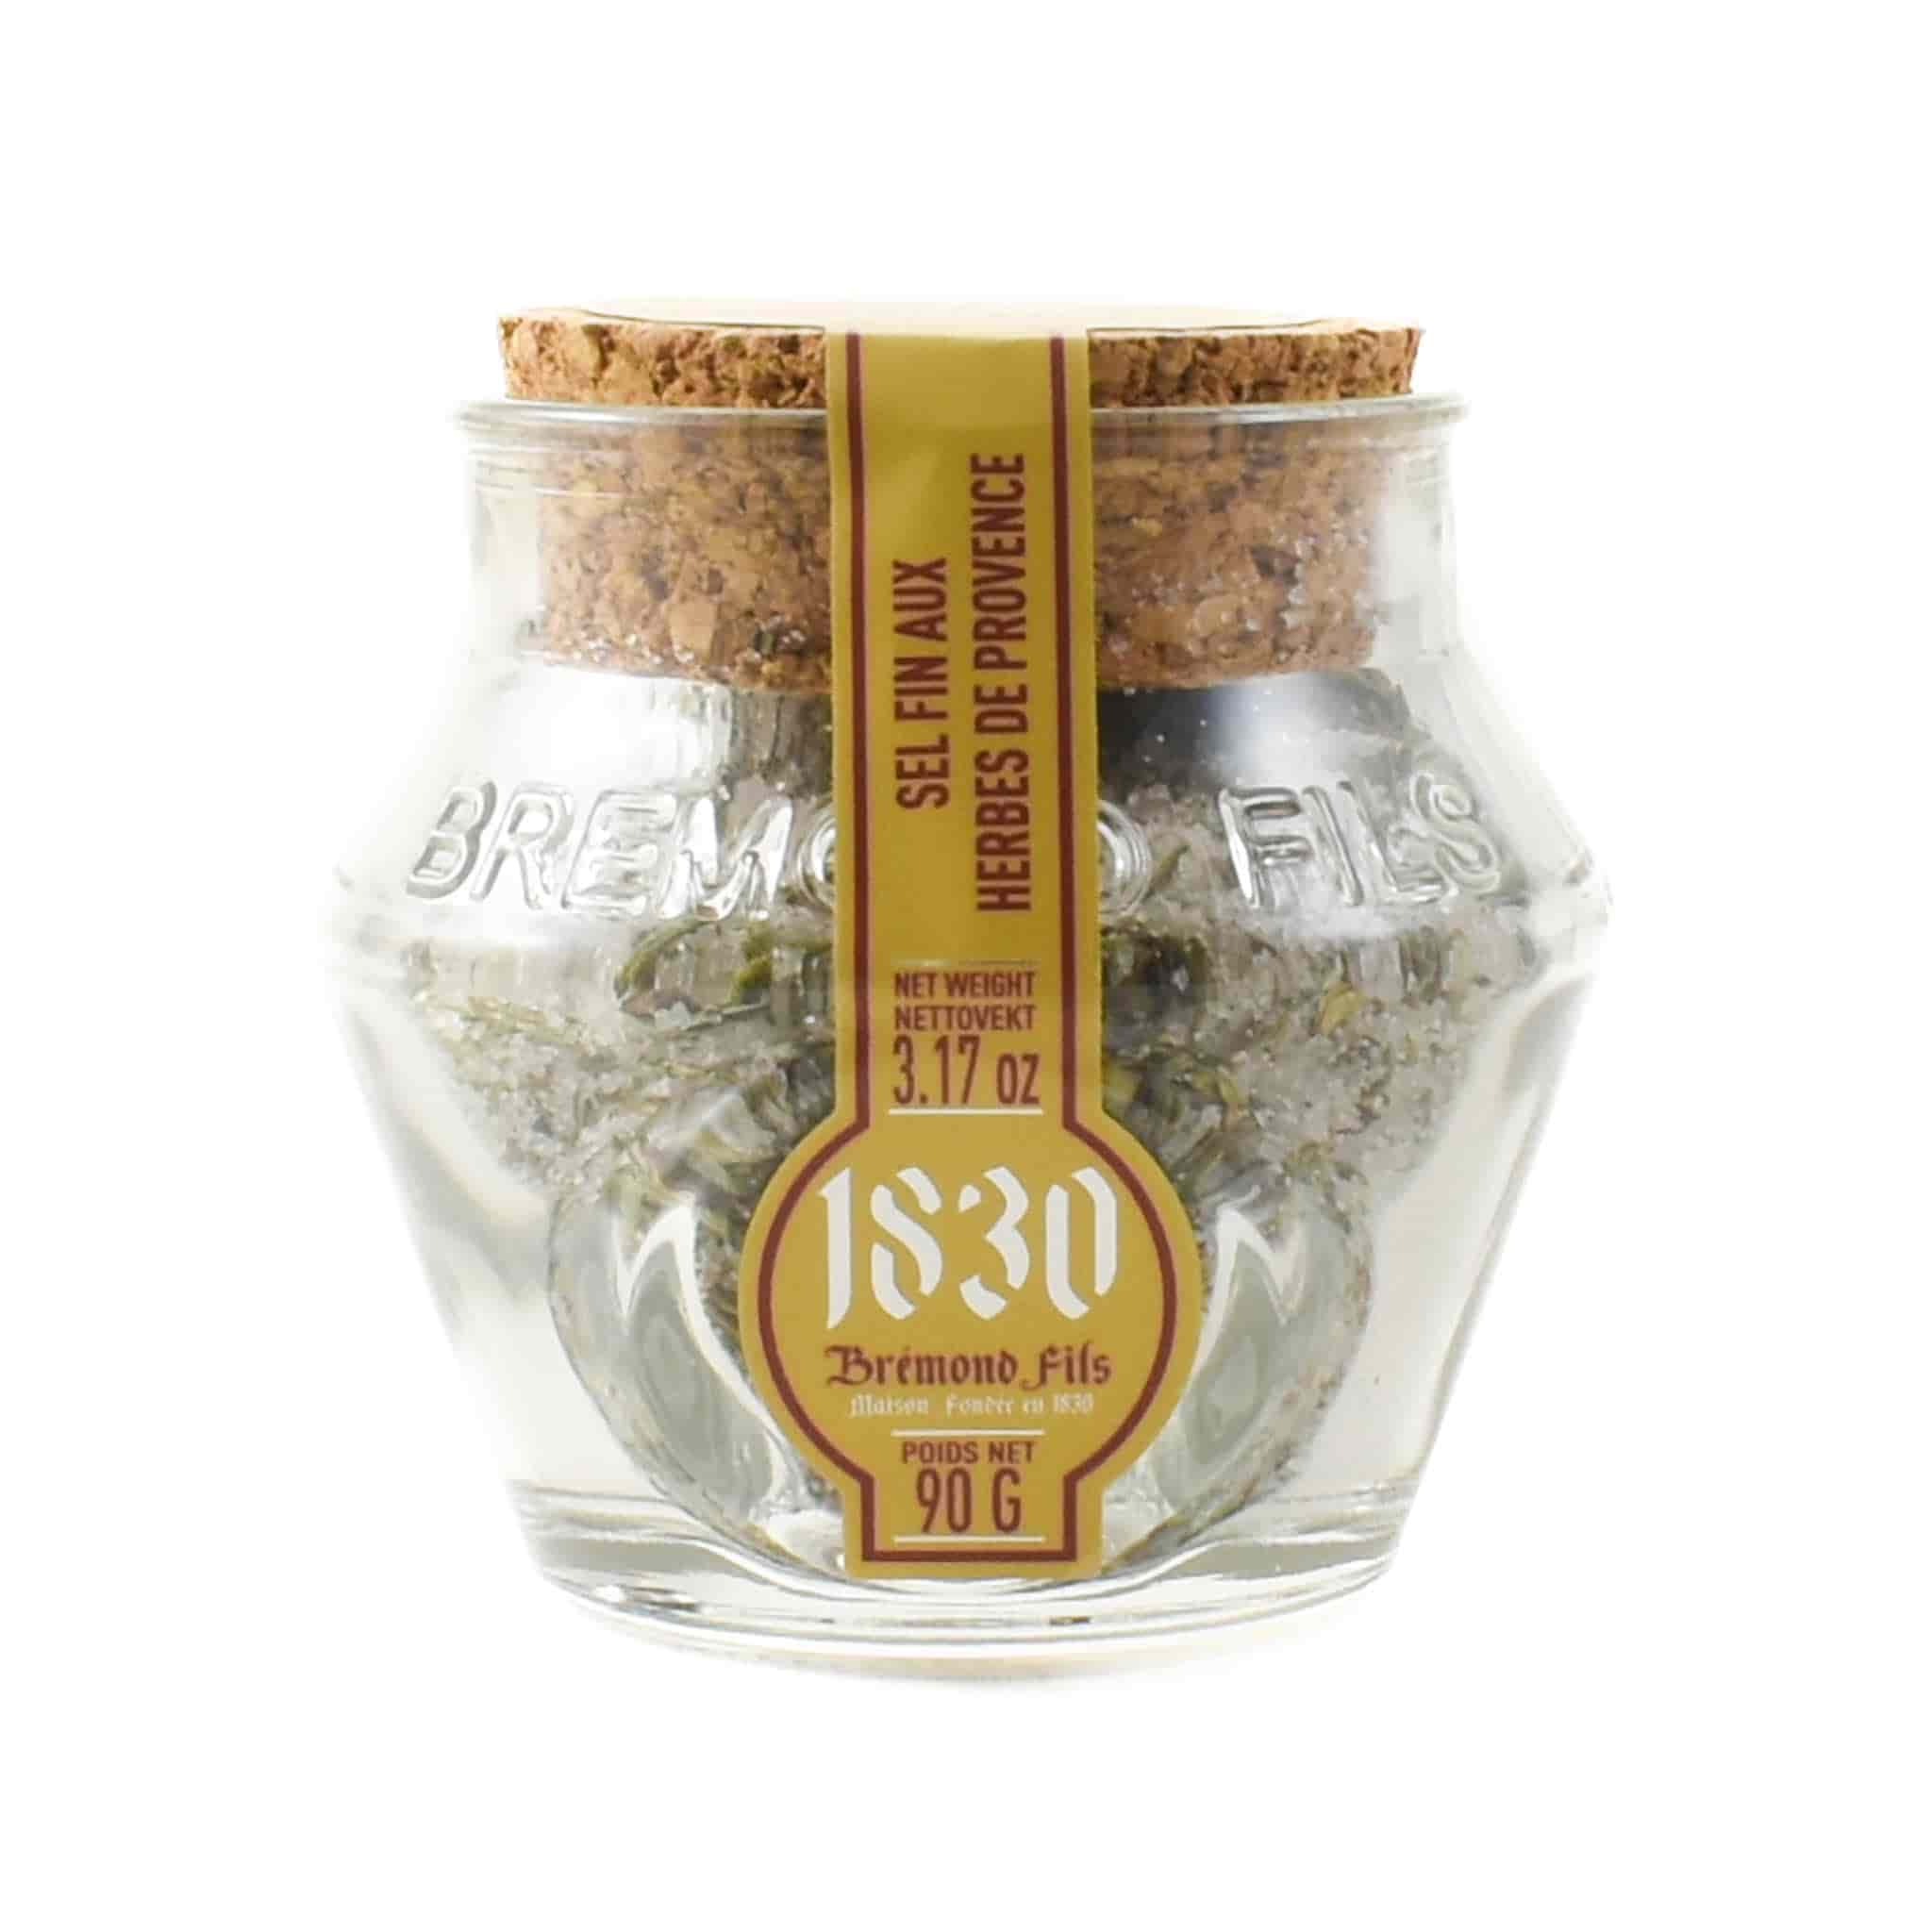 Maison Bremond Fleur De Sel with Herbs from Provence, 90g